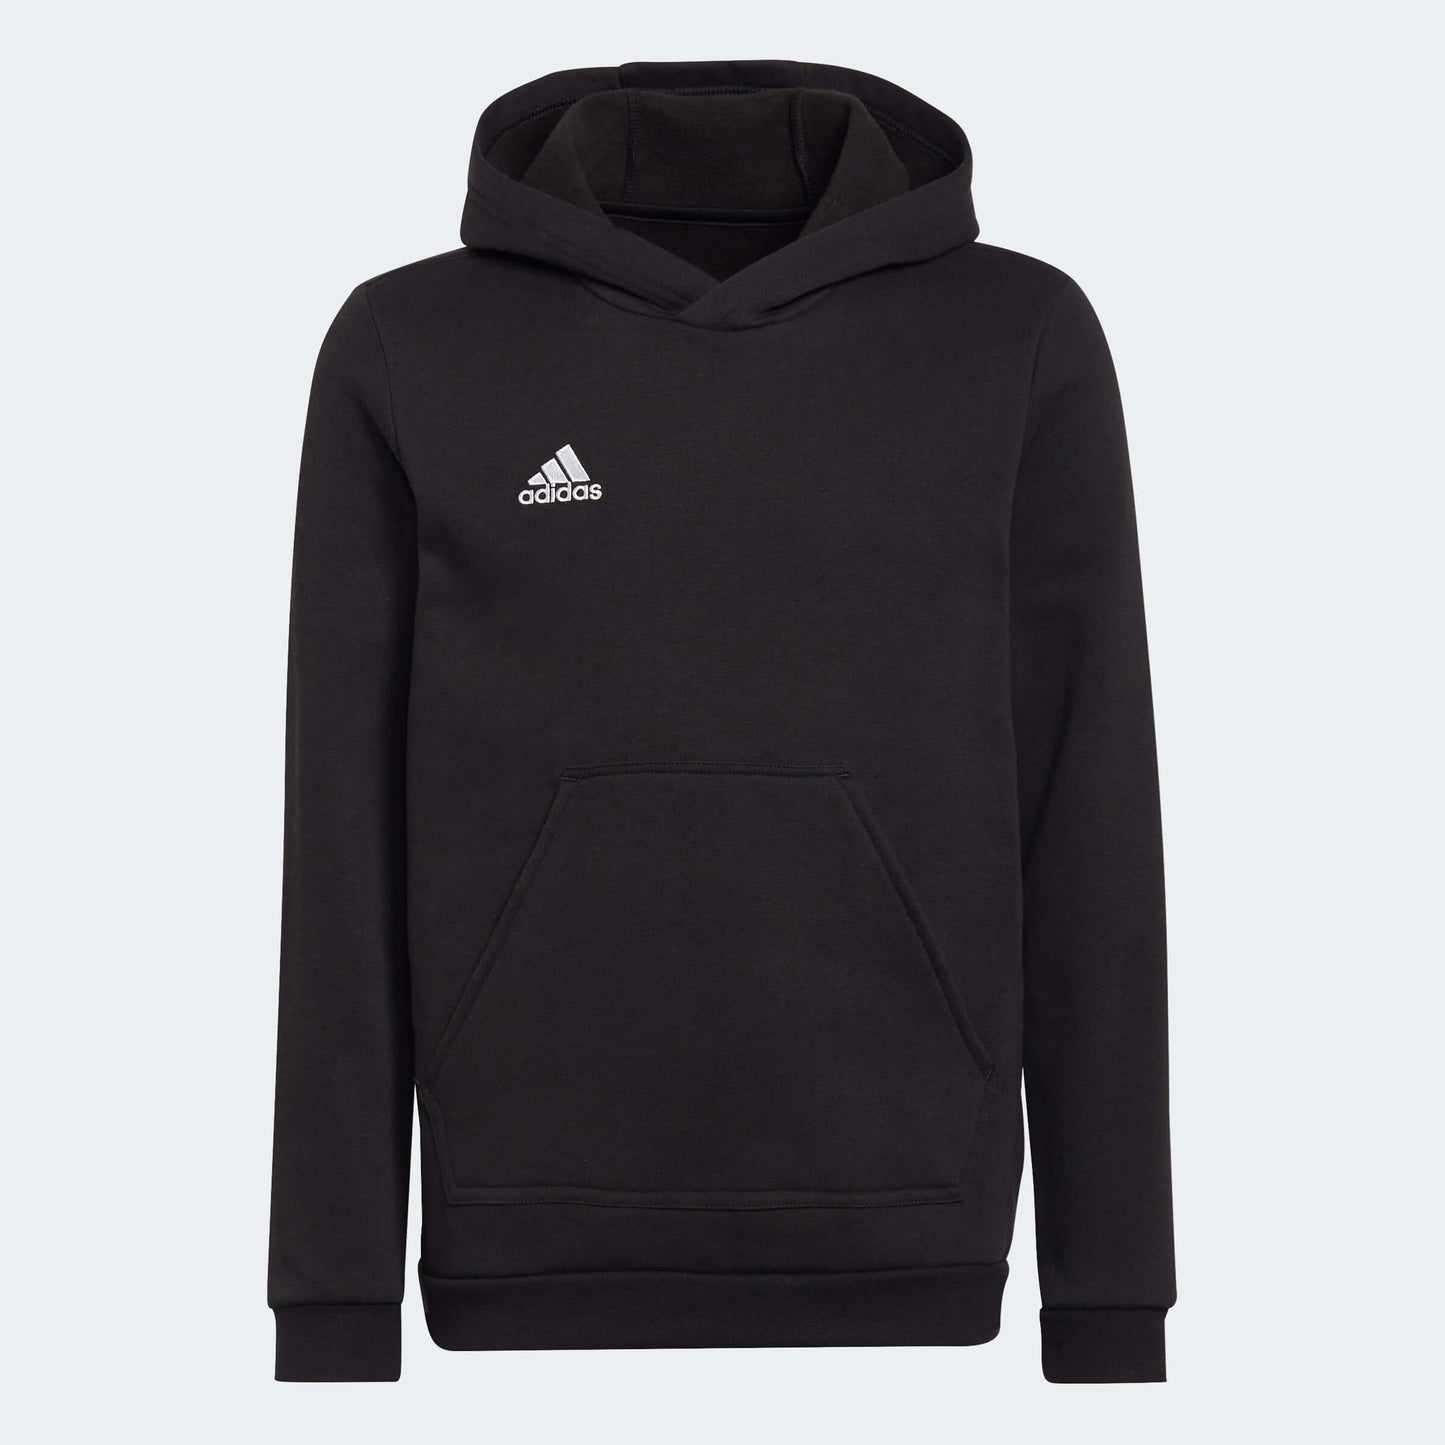 adidas YOUTH Entrada 22 Sweat Hoody Black-White (Front)